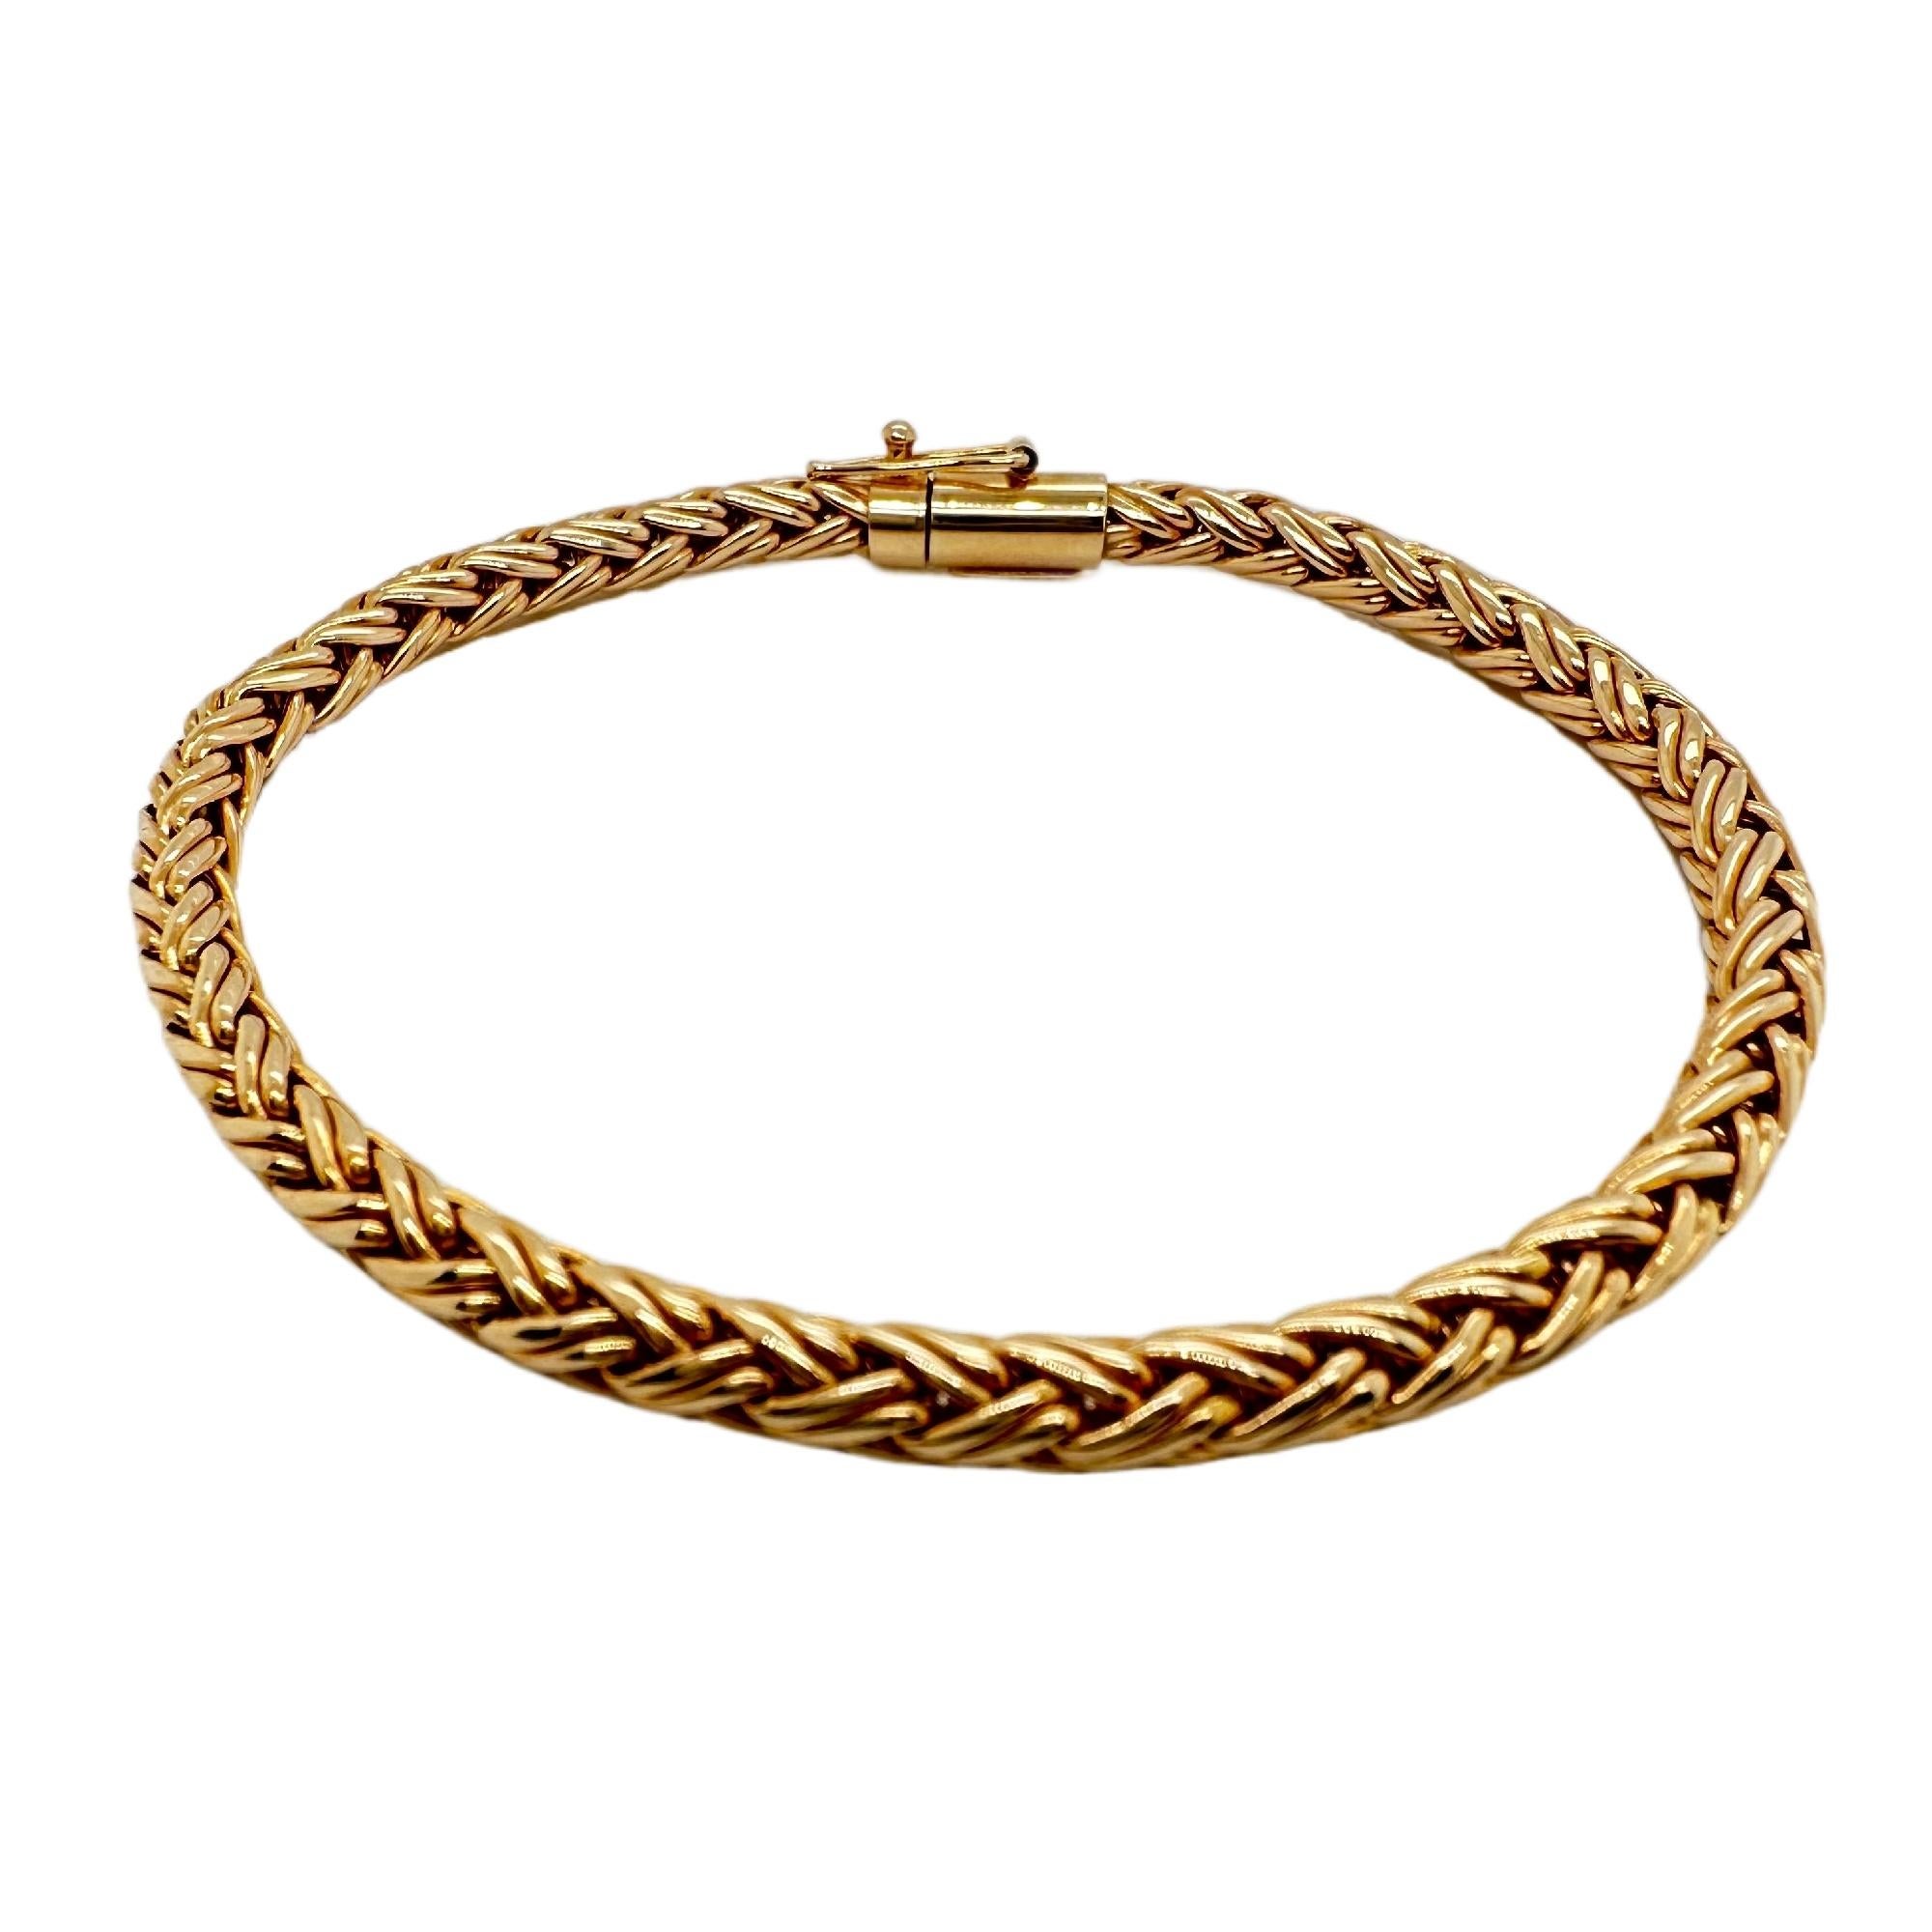 Women's or Men's Tiffany & Co. Wheat Braided Rope Bracelet in 14k Yellow Gold For Sale